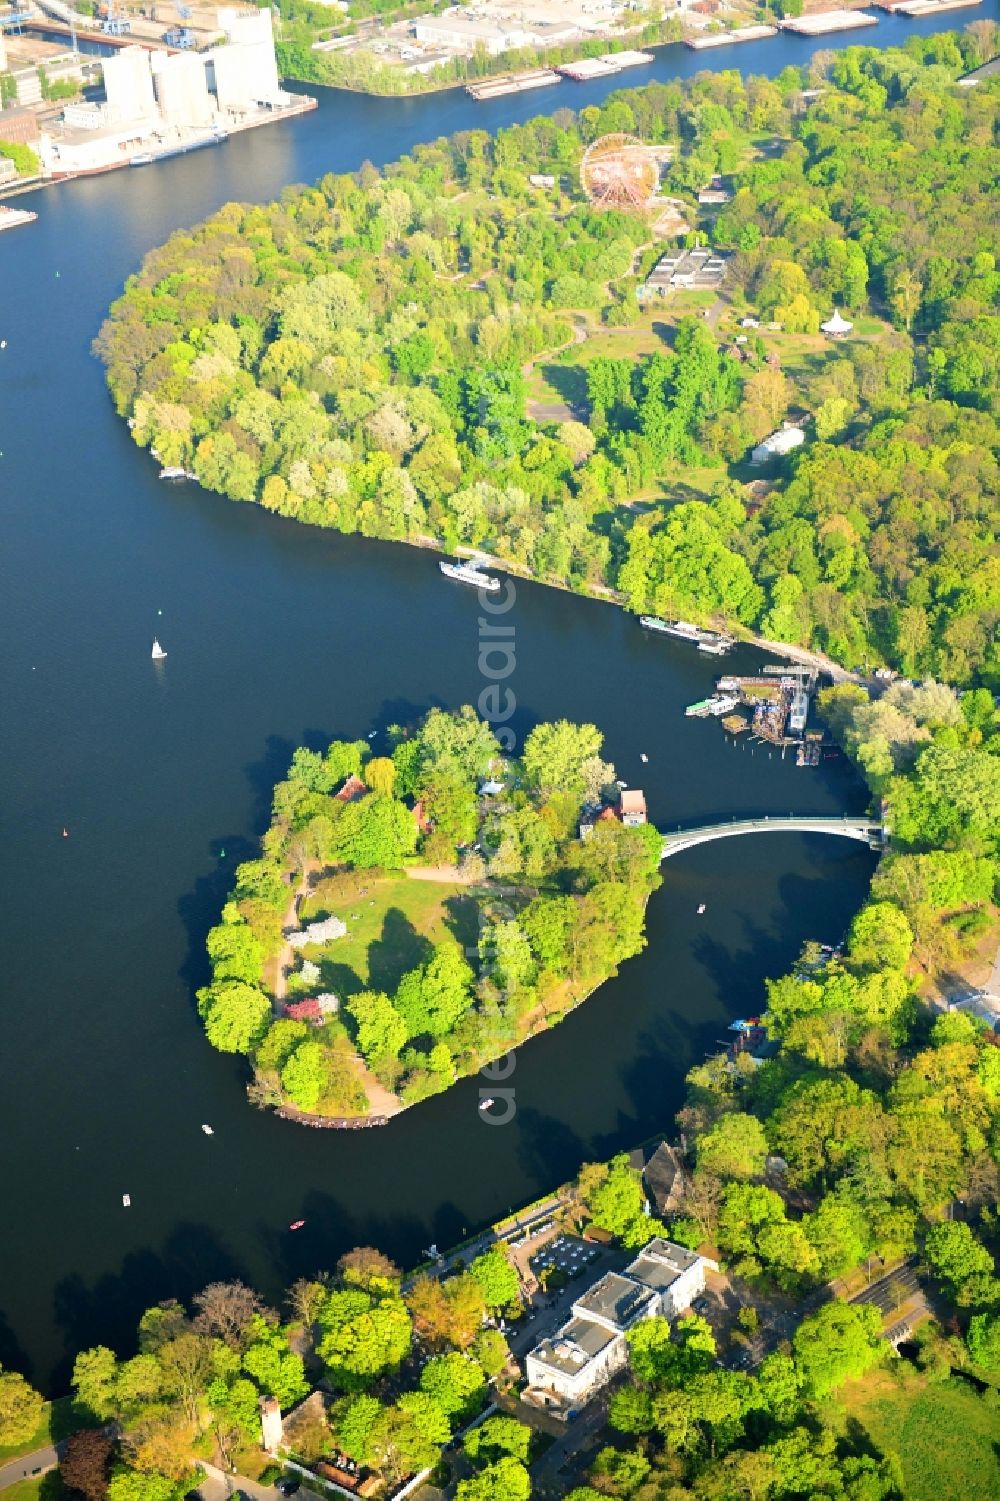 Berlin from the bird's eye view: Island on the banks of the river course of Spree River in the district Treptow in Berlin, Germany